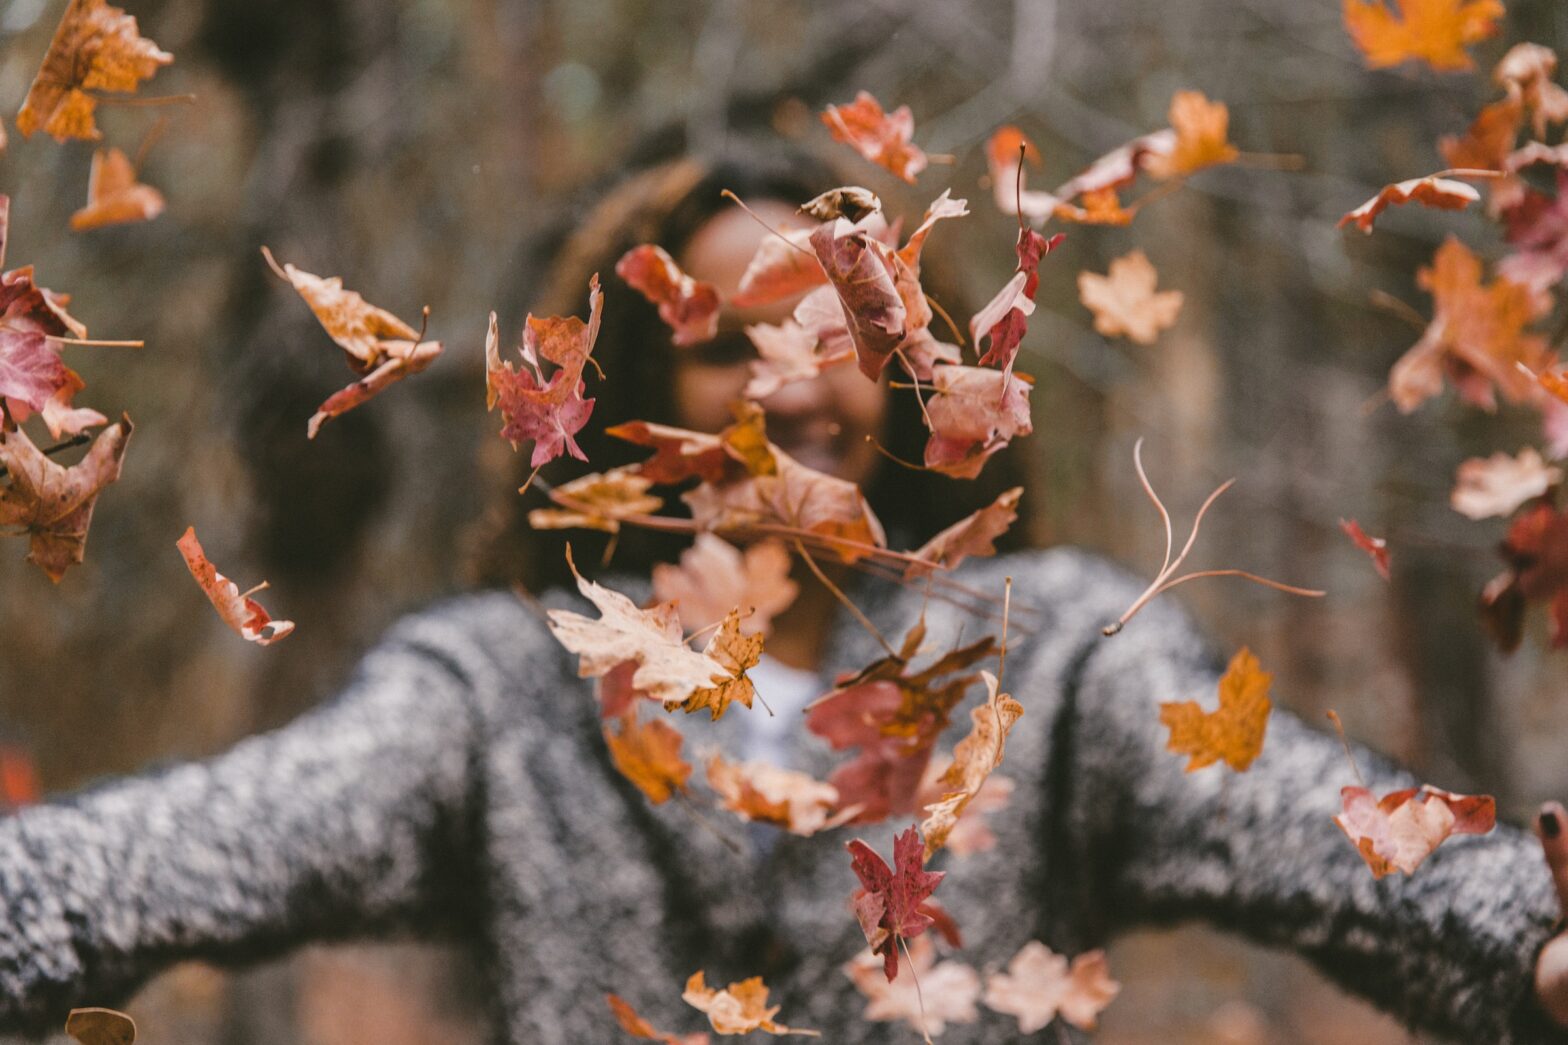 A woman tossing leaves in front of her face